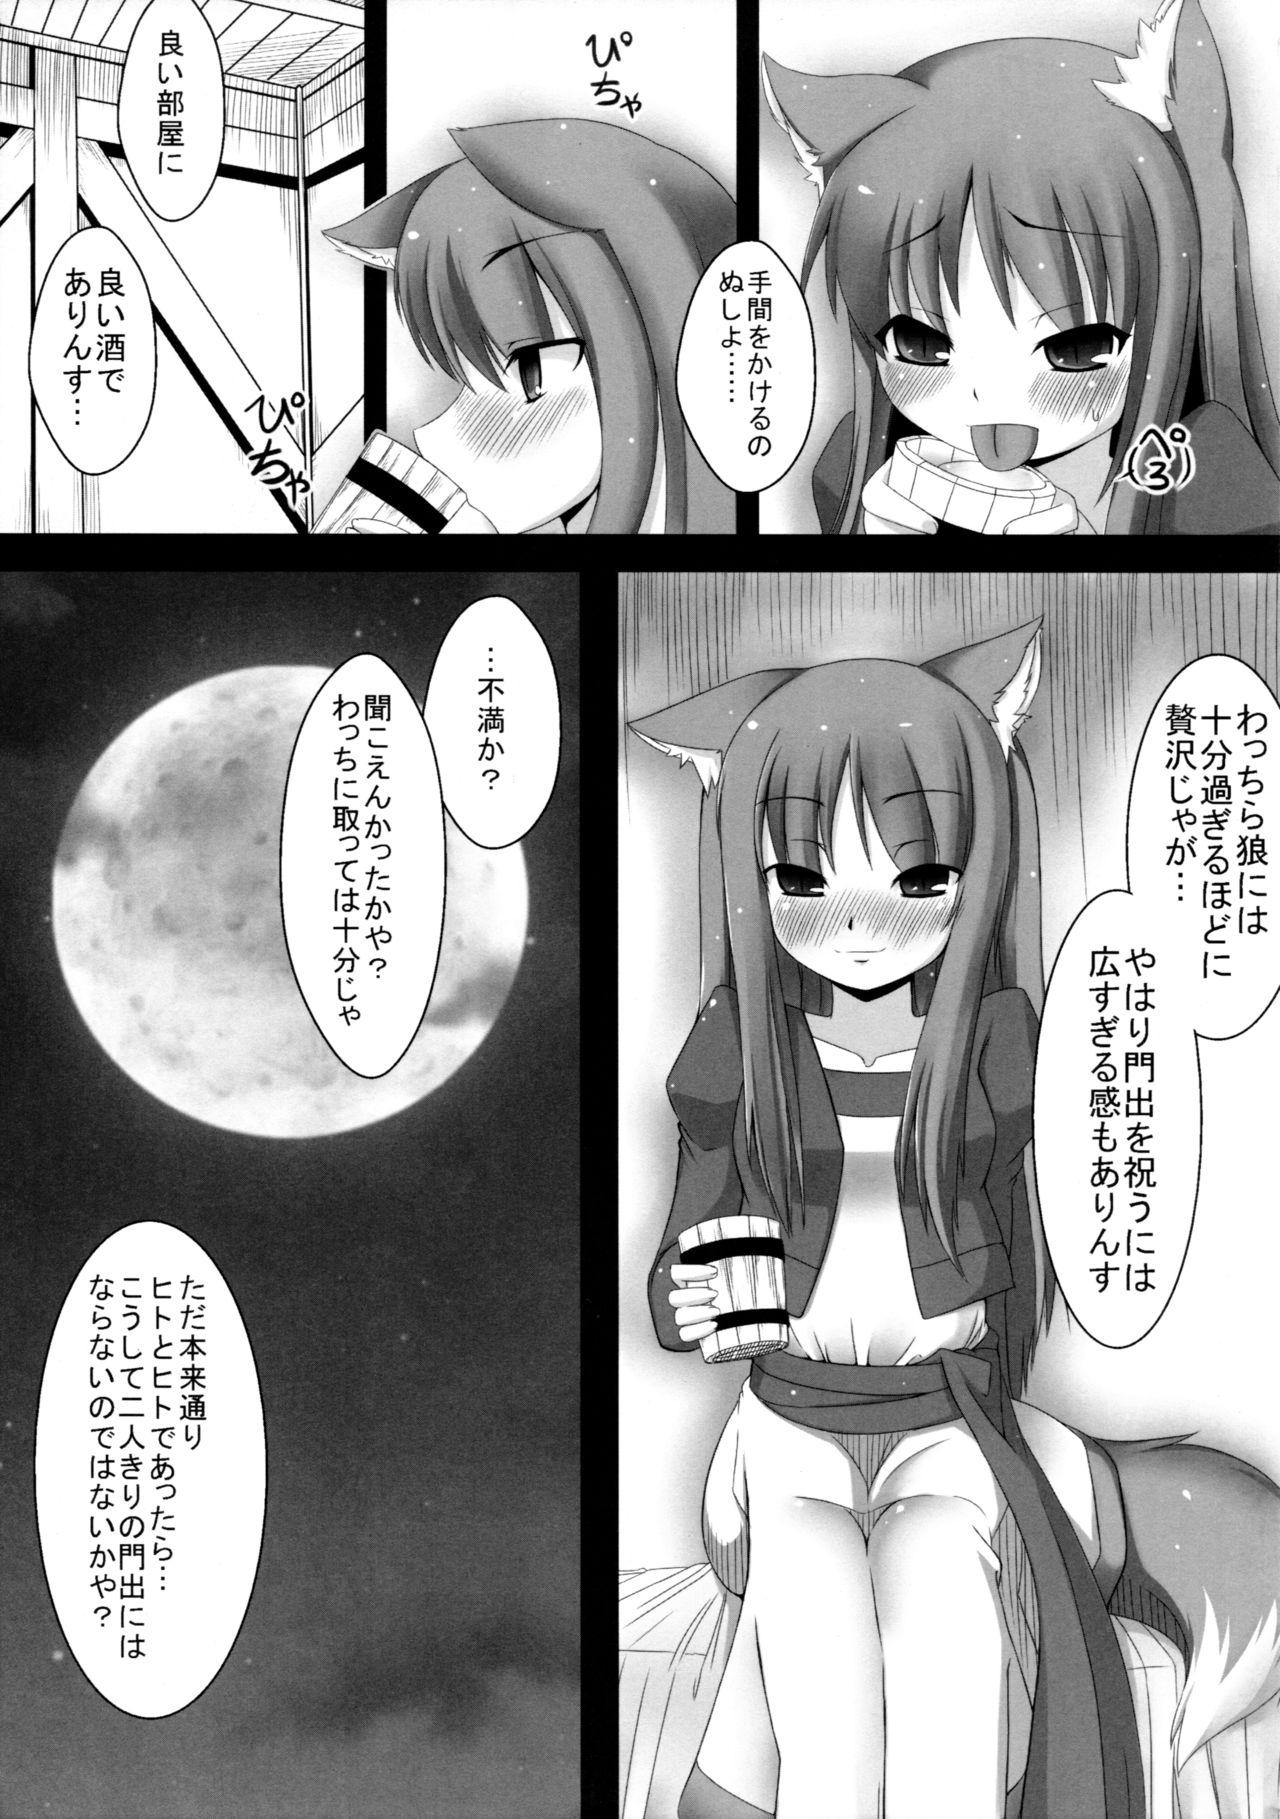 Pissing Ookami to Yoi no Sakana - Spice and wolf Bbw - Page 6